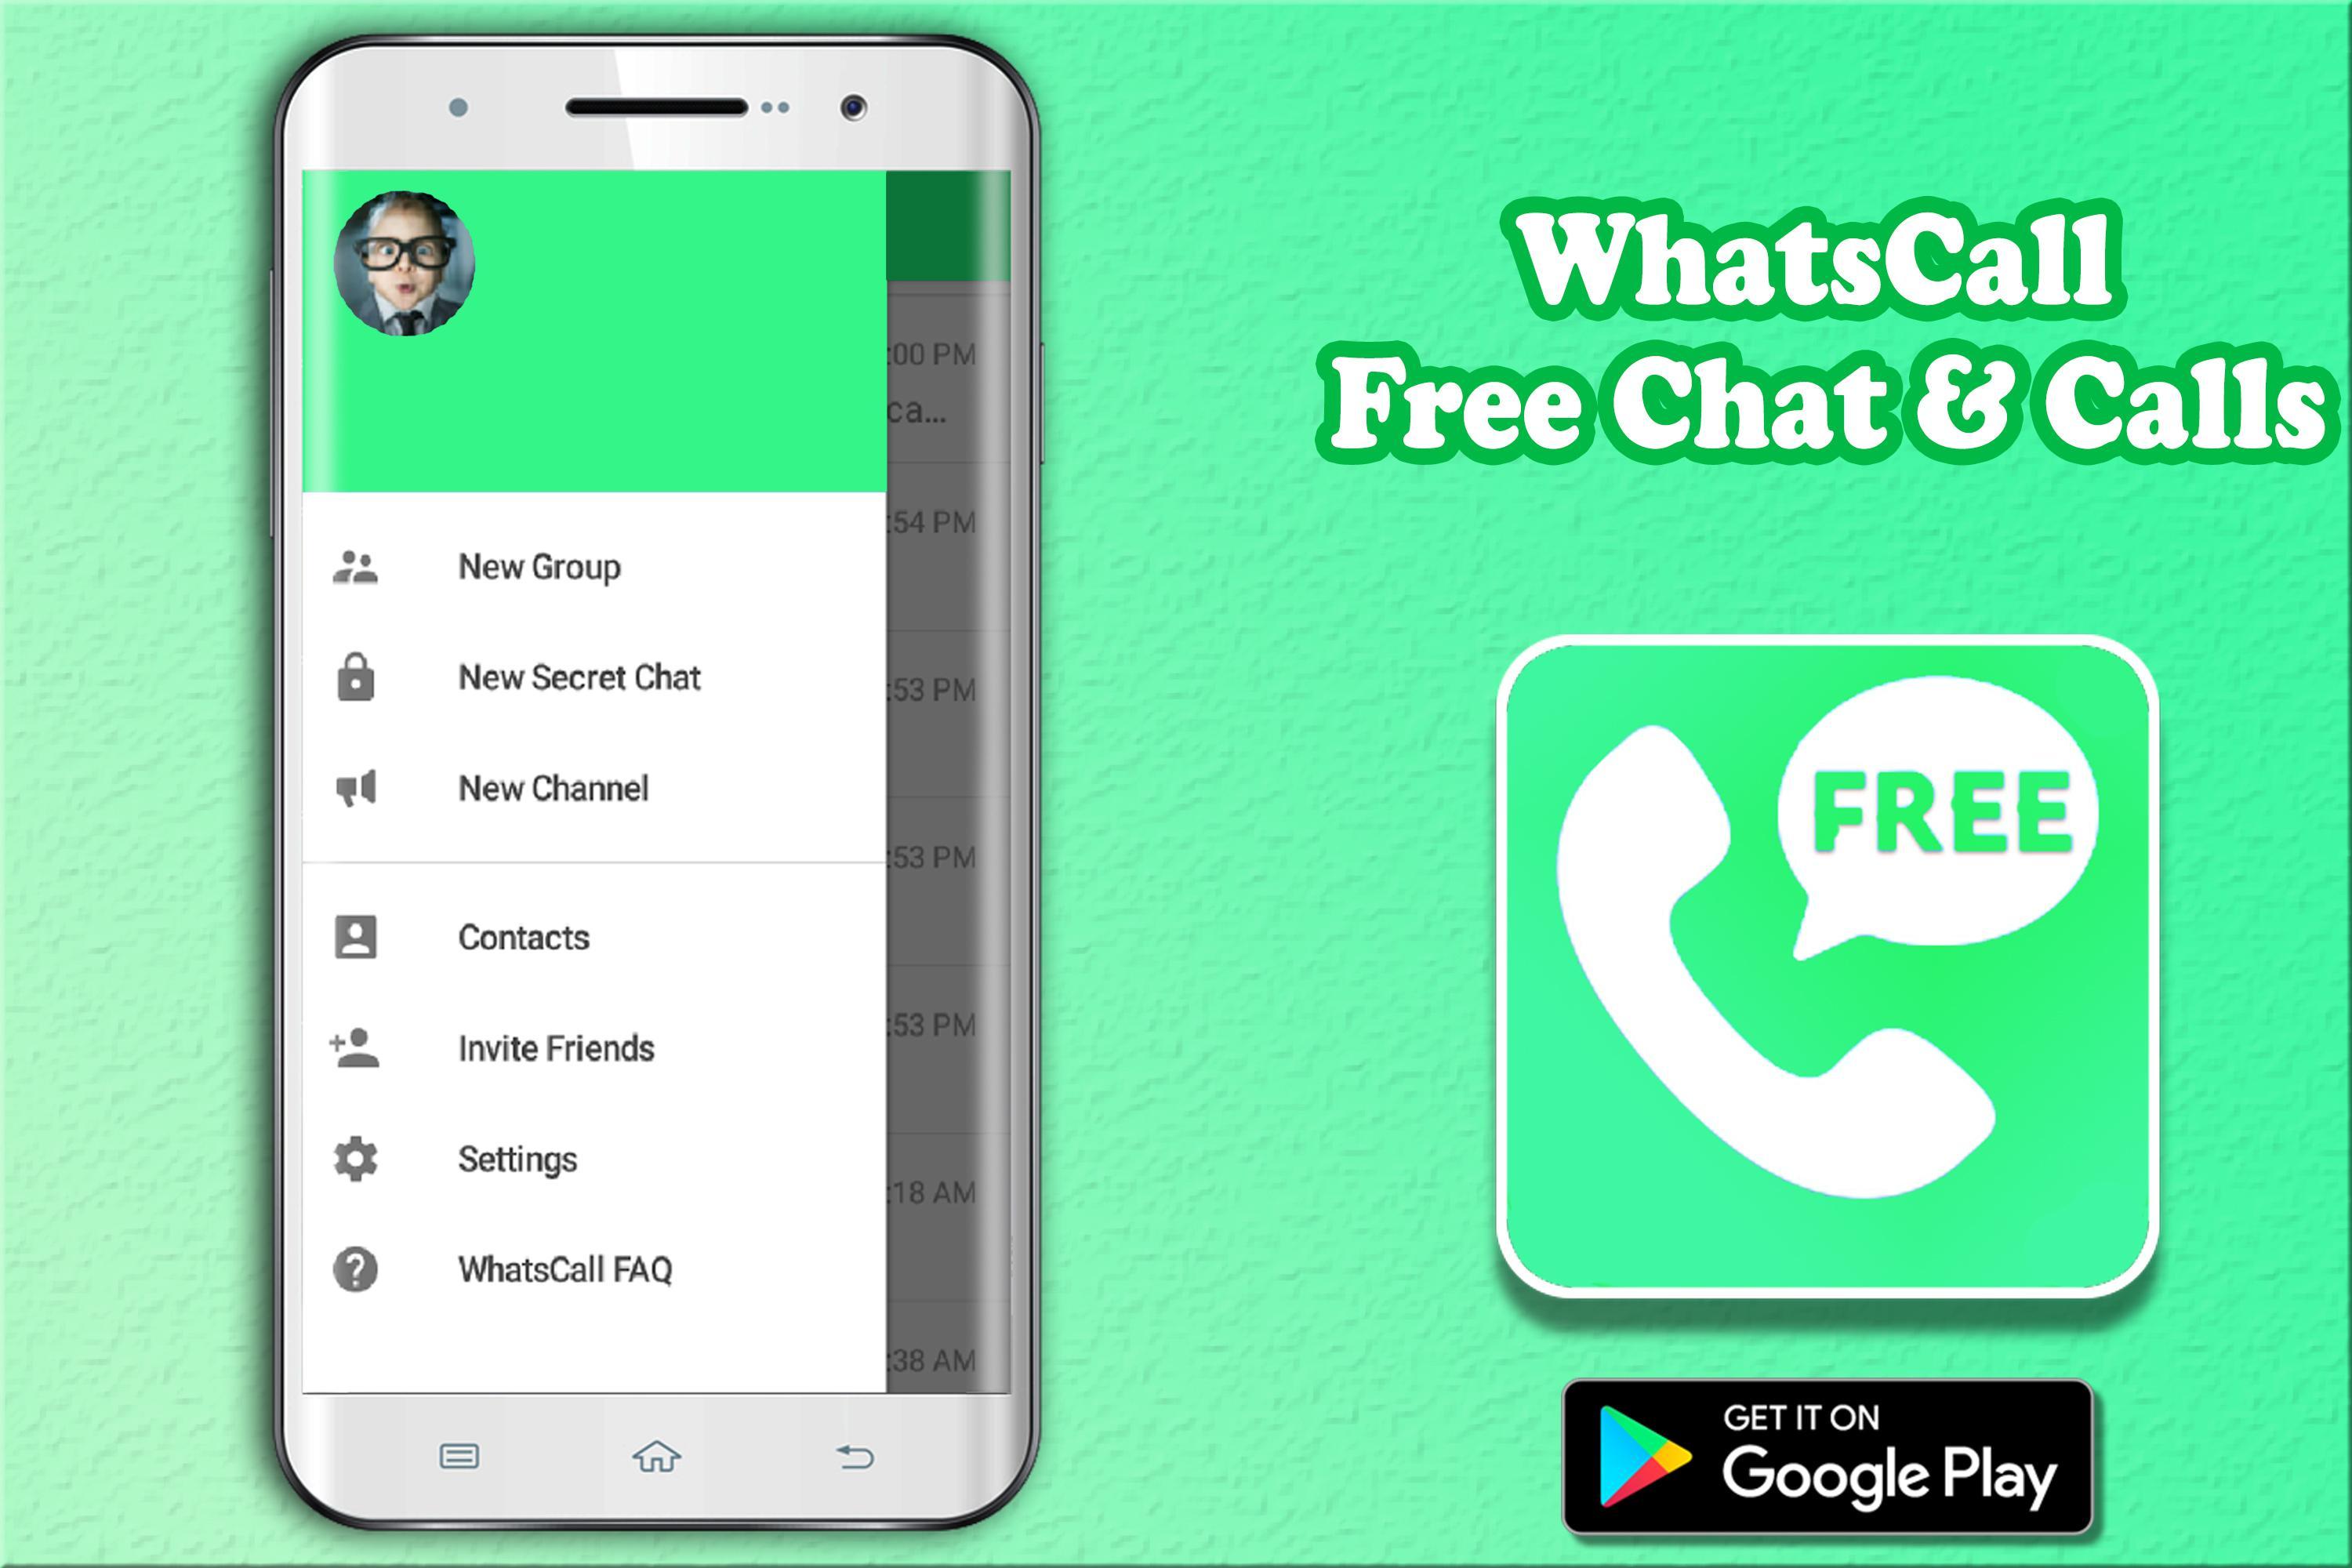 Free Guide for WhatsCall - Free Chat & Calls स्क्रीनशॉट 2.